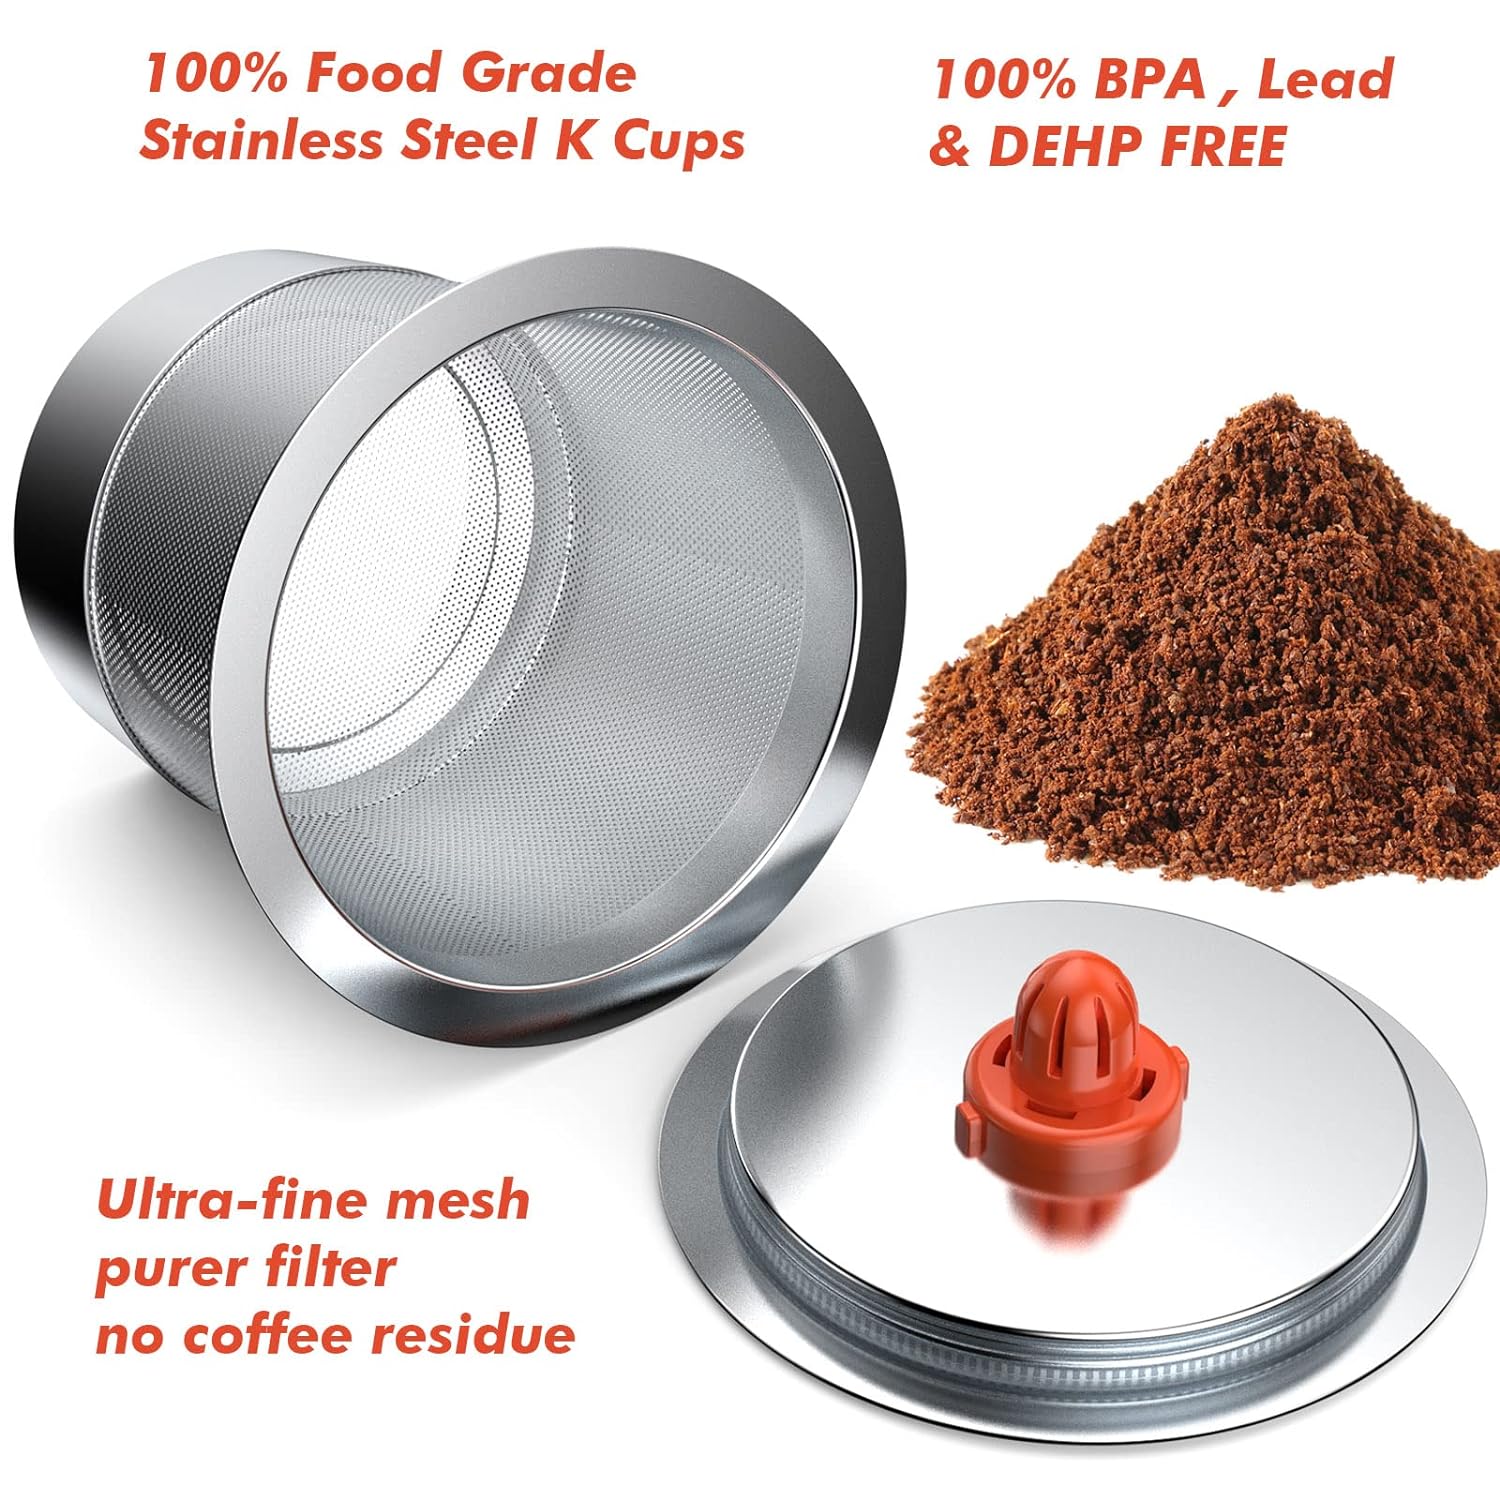 Reusable K Cups For Keurig keurig reusable coffee pods Compatible with 1.0 and 2.0 Keurig Single Cup Coffee Maker Stainless Steel K Cup,BPA Free(2 pack)